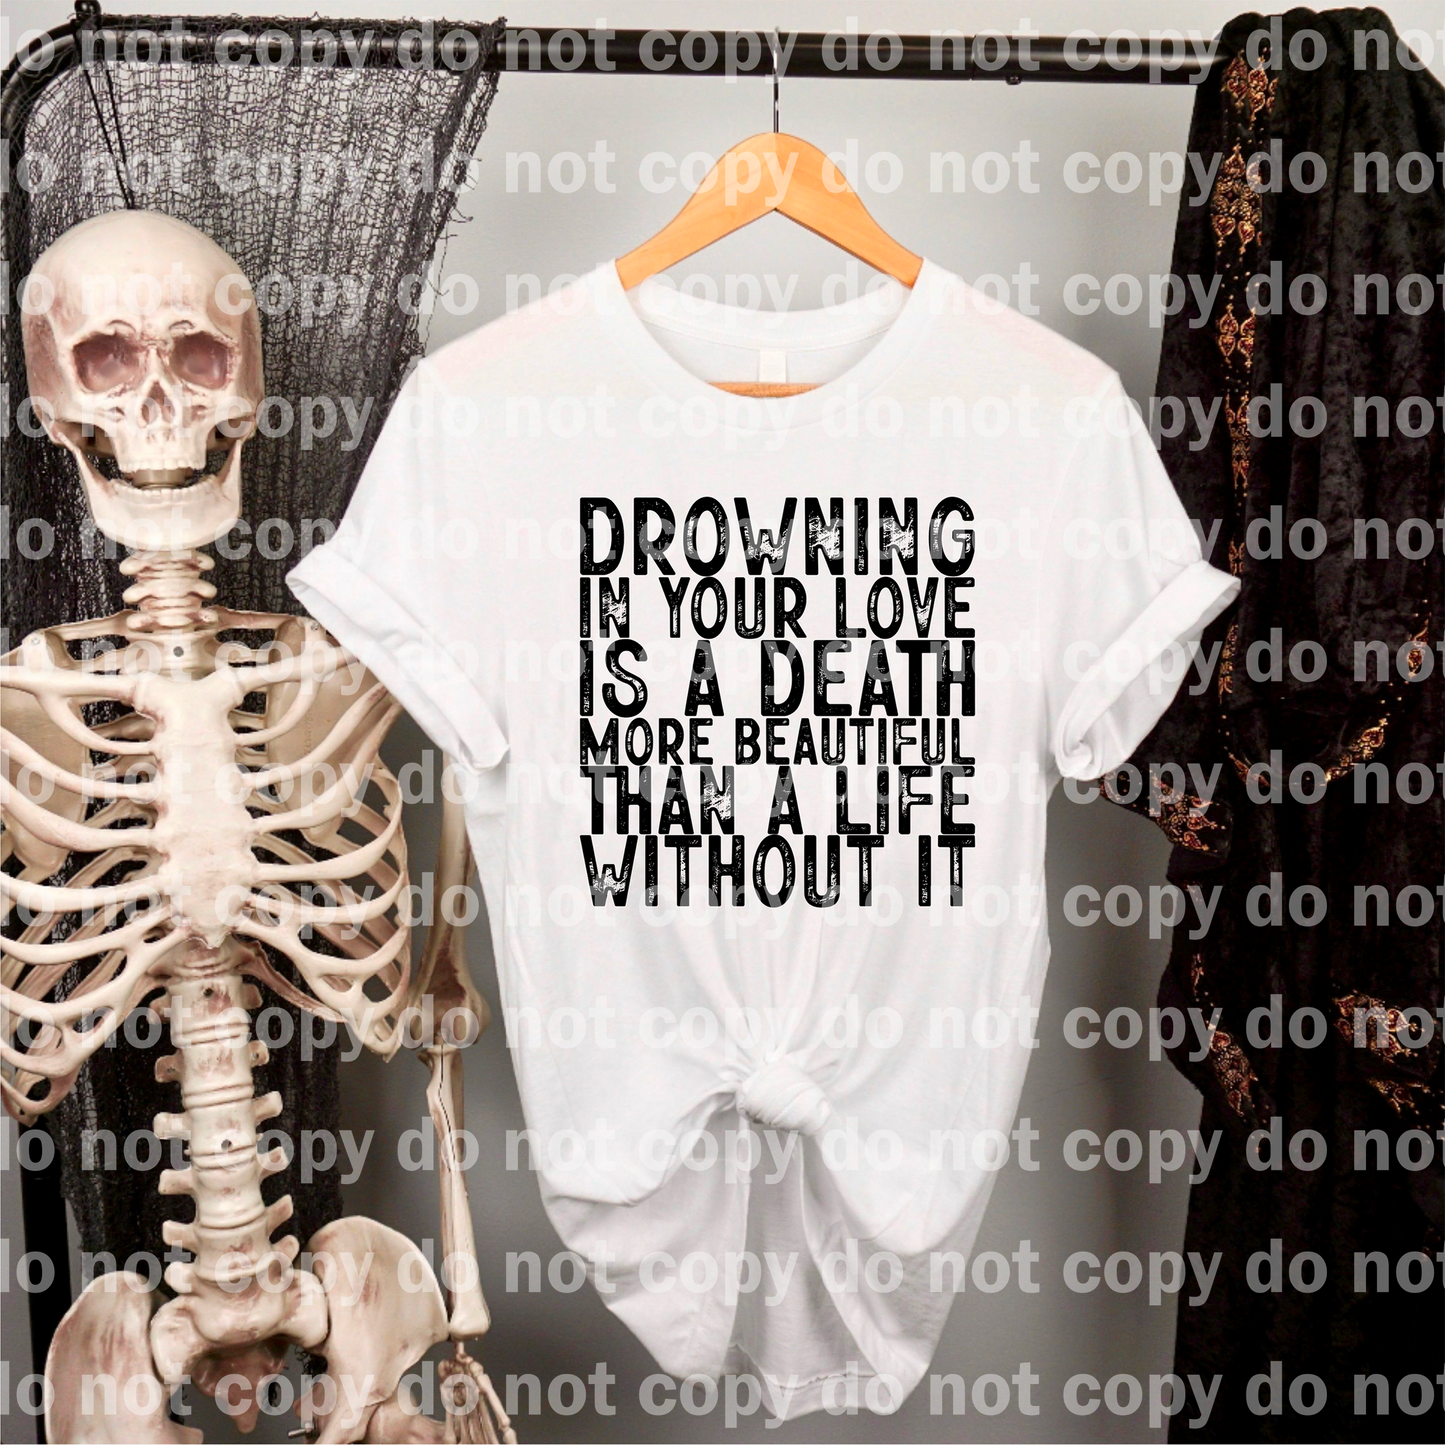 Drowning In Your Love Is A Death More Beautiful Than A Life Without It Distressed Dream Print or Sublimation Print